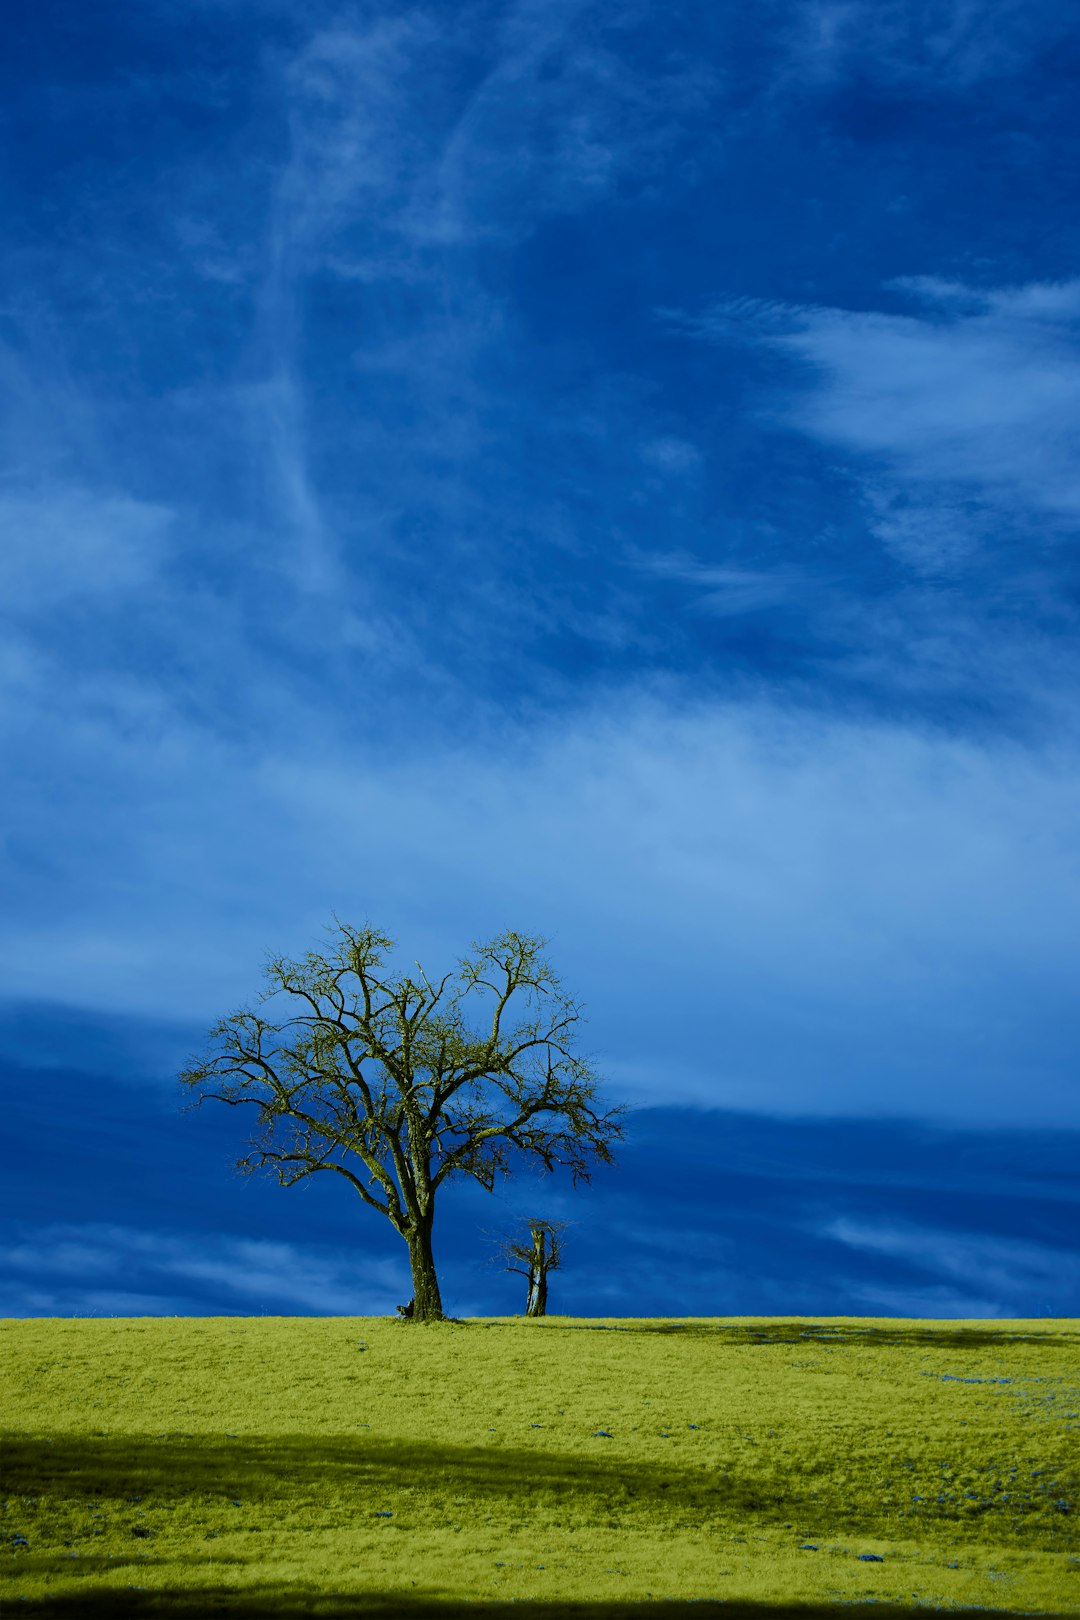 leafless tree on green grass field under white clouds and blue sky during daytime